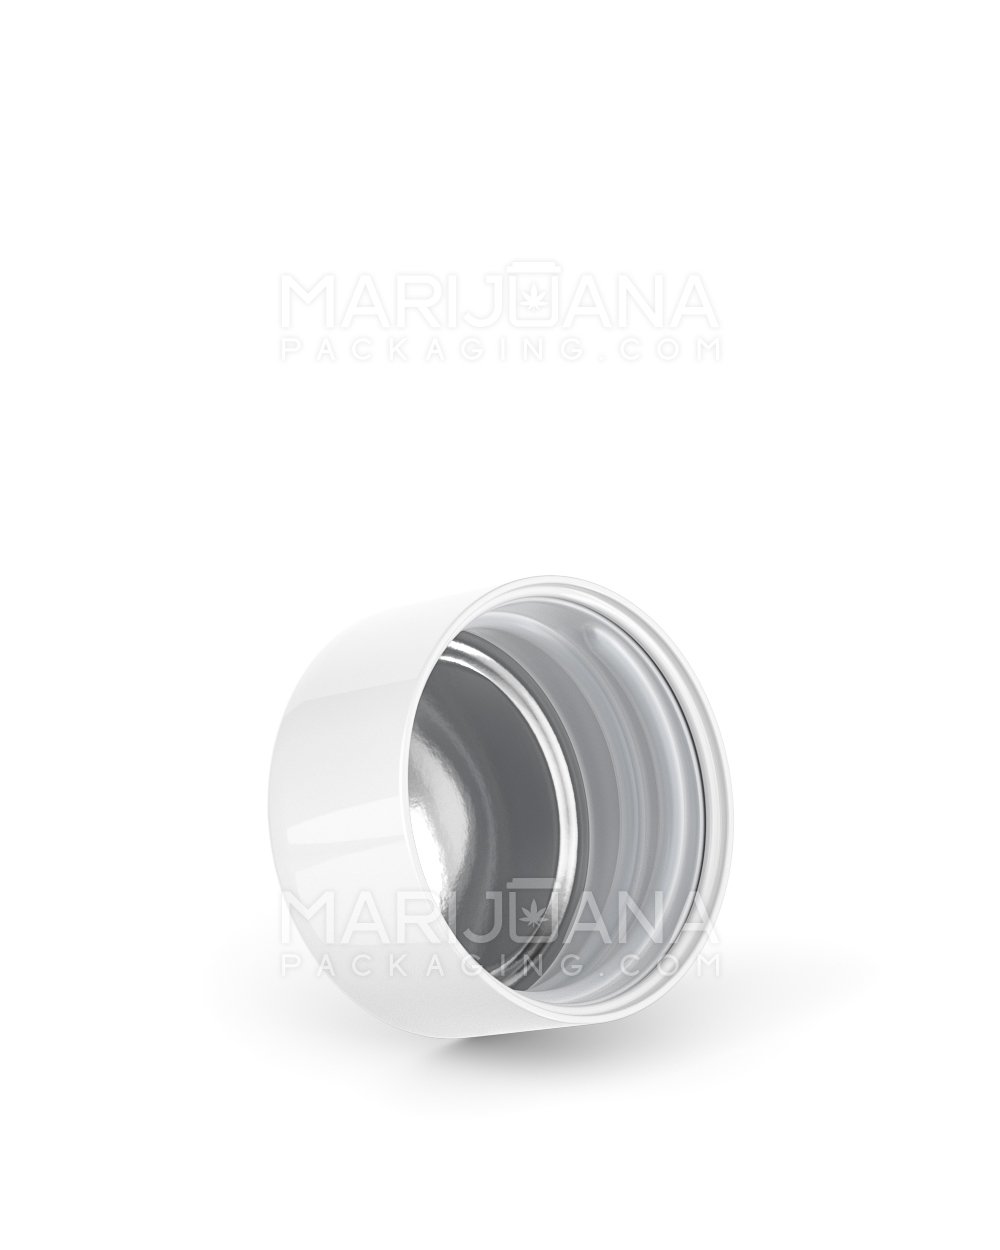 Child Resistant | Smooth Push Down & Turn Plastic Caps w/ Foil Liner | 28mm - Glossy White - 504 Count - 2